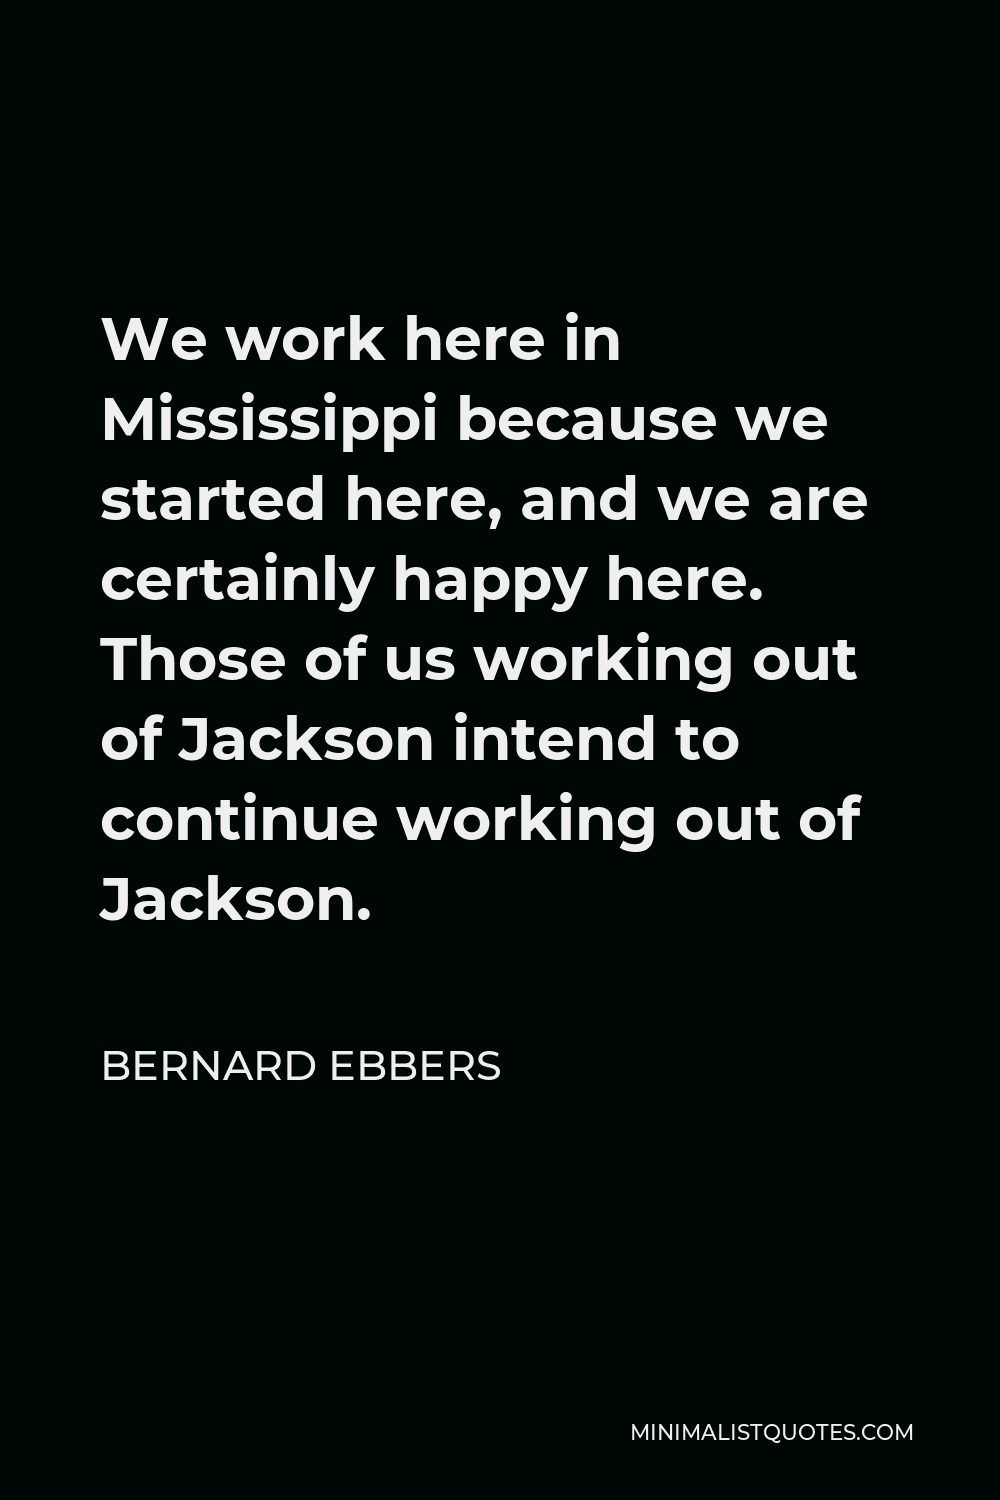 Bernard Ebbers Quote - We work here in Mississippi because we started here, and we are certainly happy here. Those of us working out of Jackson intend to continue working out of Jackson.